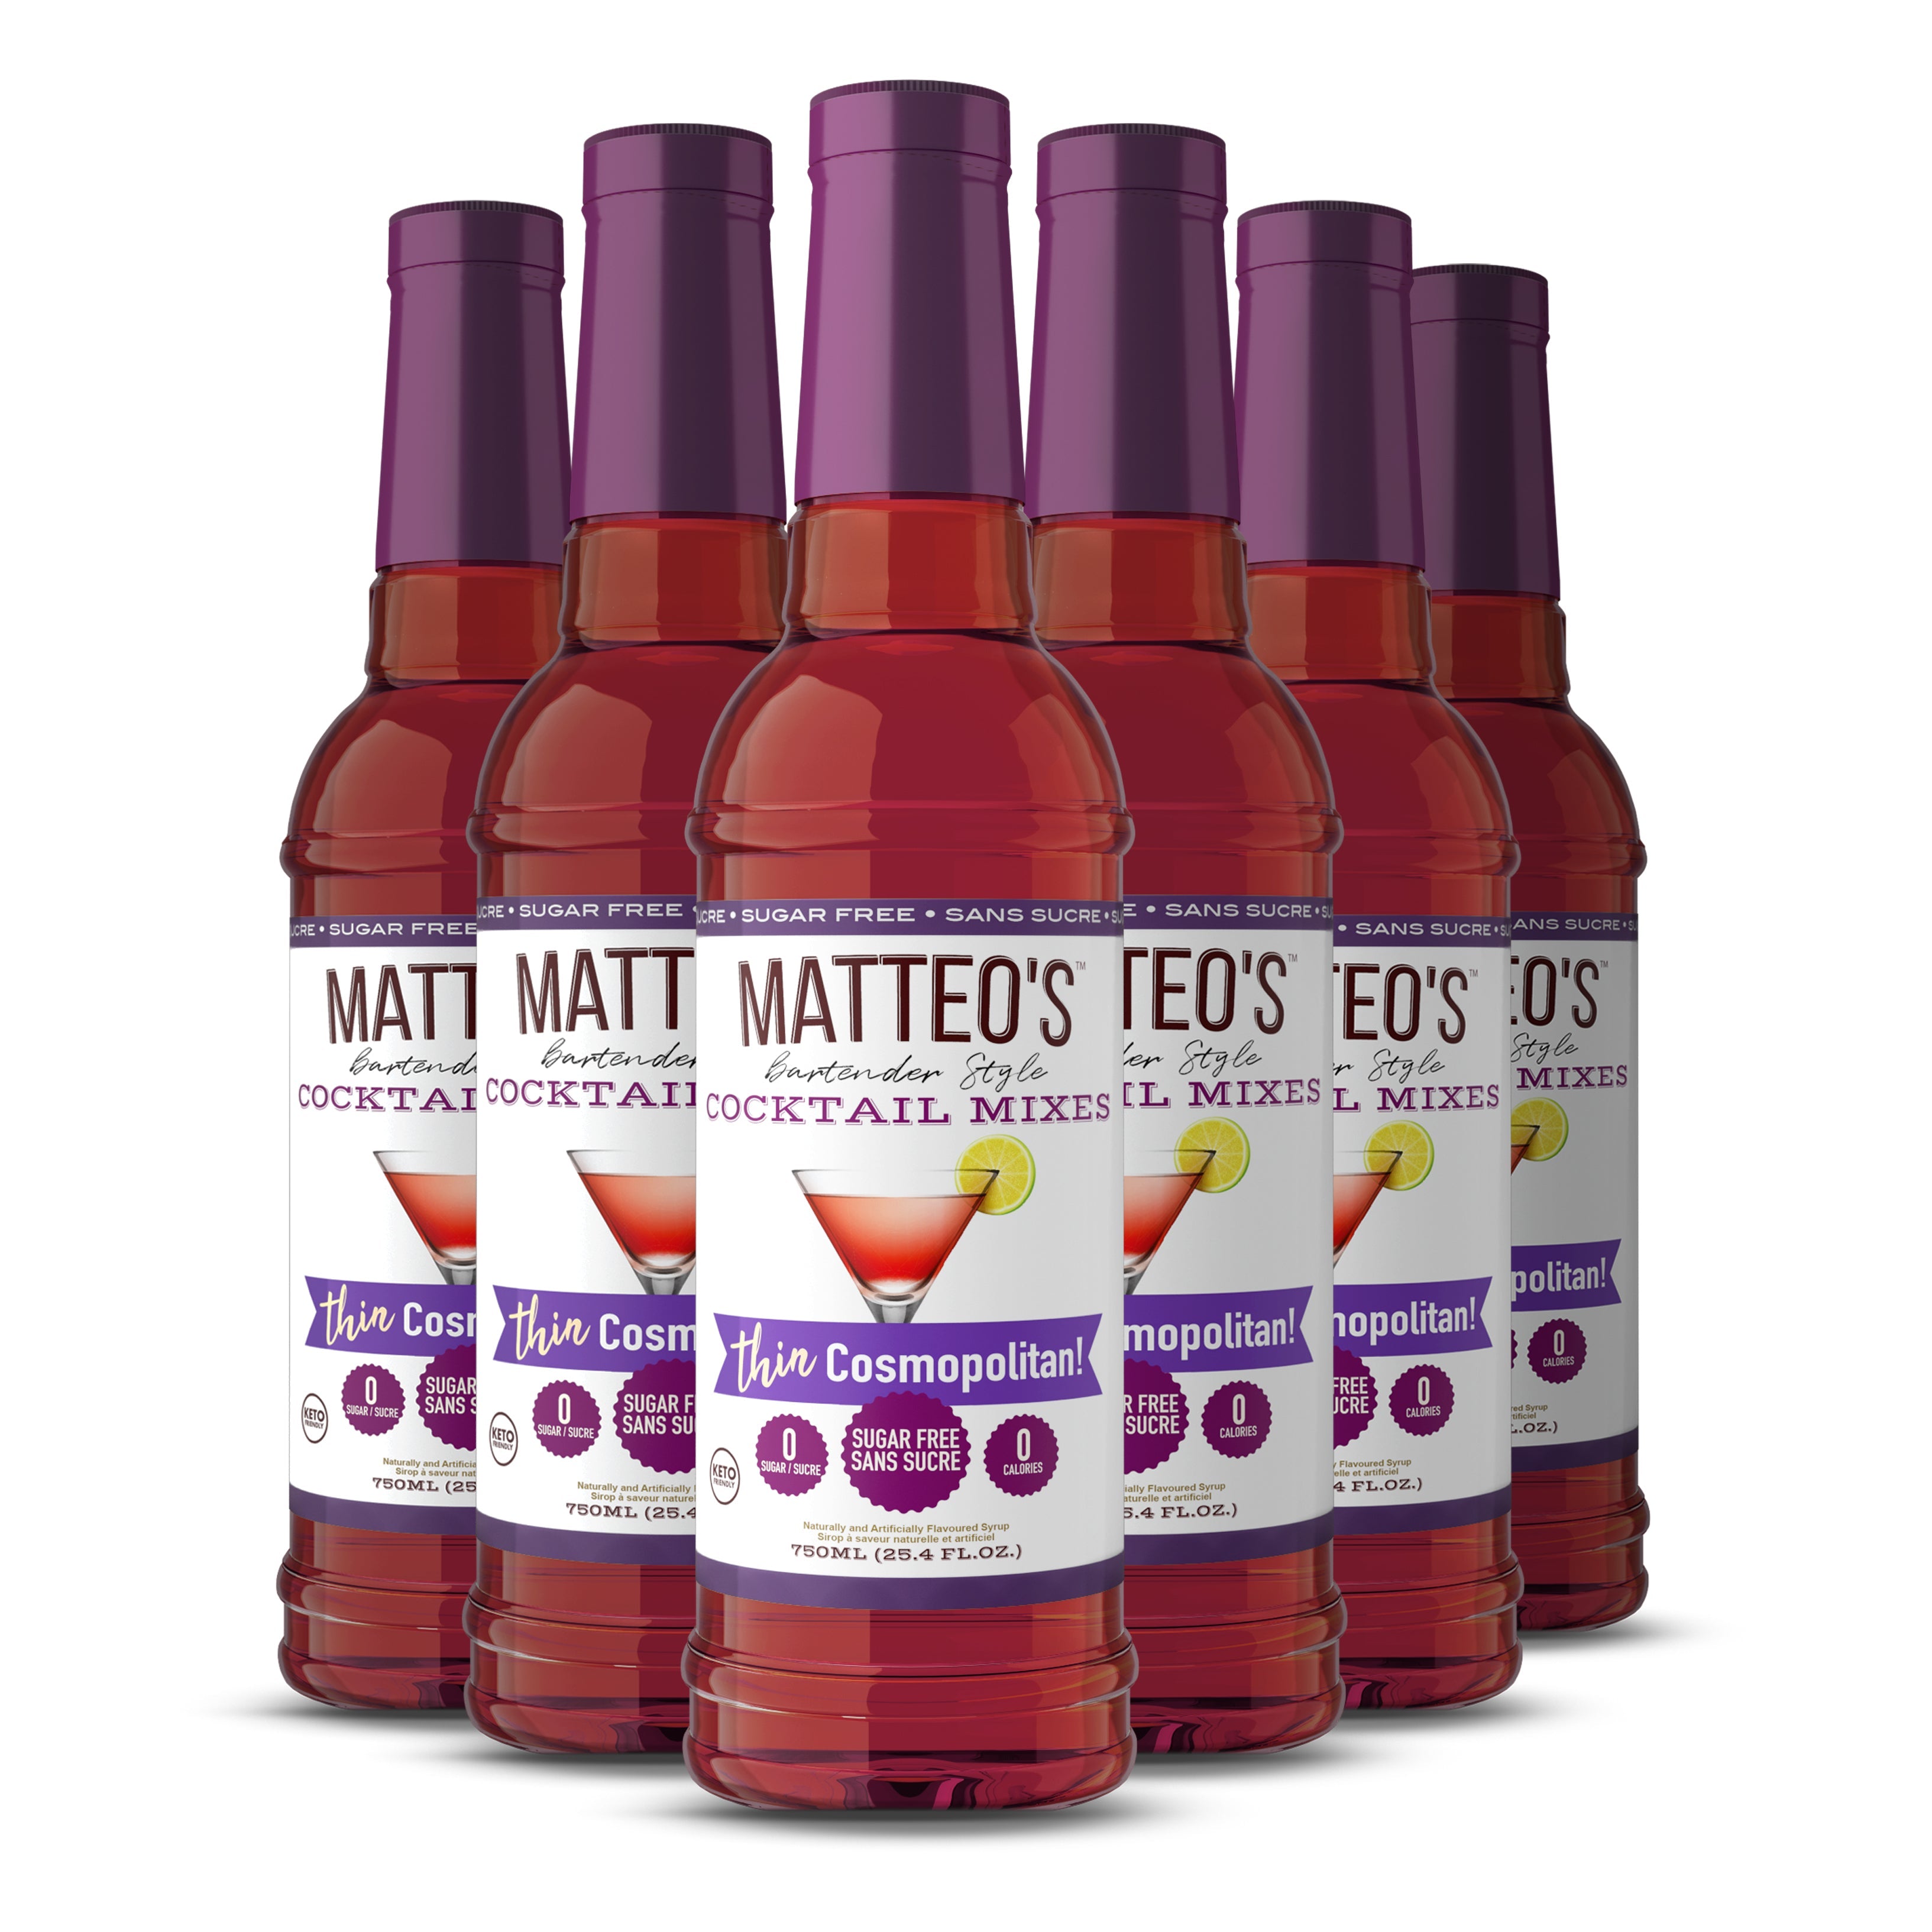 Sugar Free Coffee Syrup, Variety Pack, (4 Flavors) - Matteo's Coffee Syrup